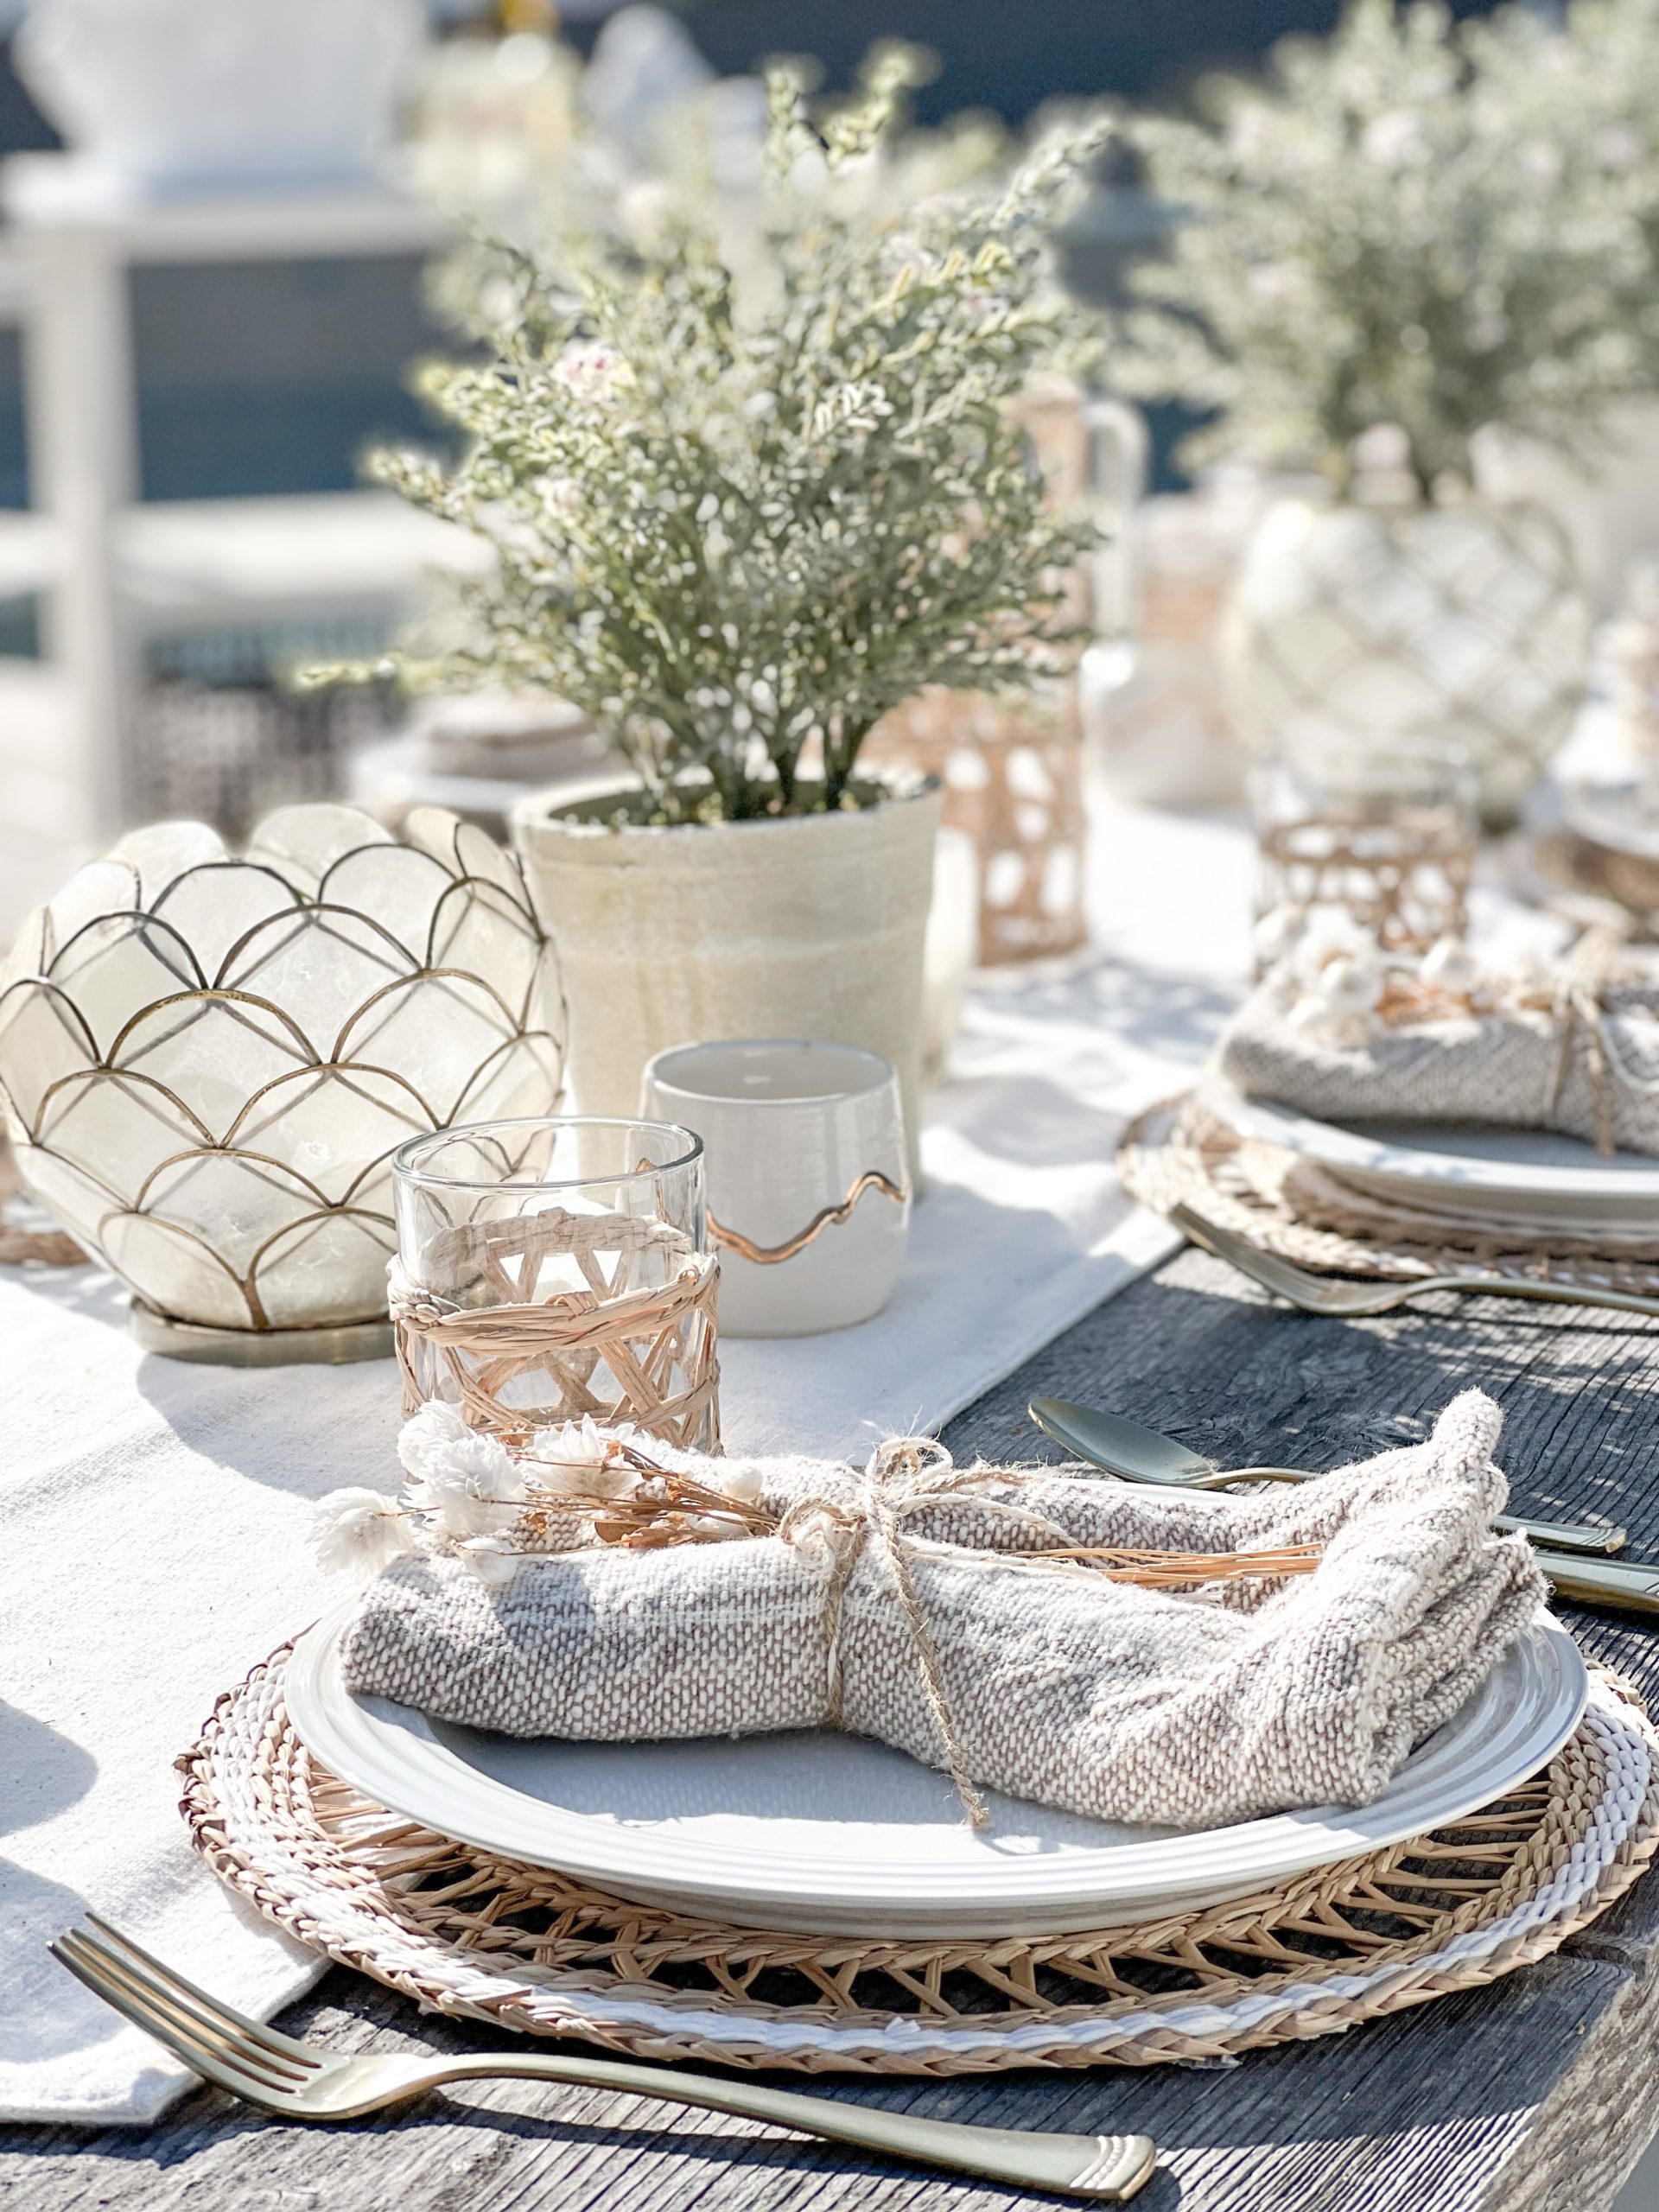 A Simple and Fresh Outdoor Summer Tablescape